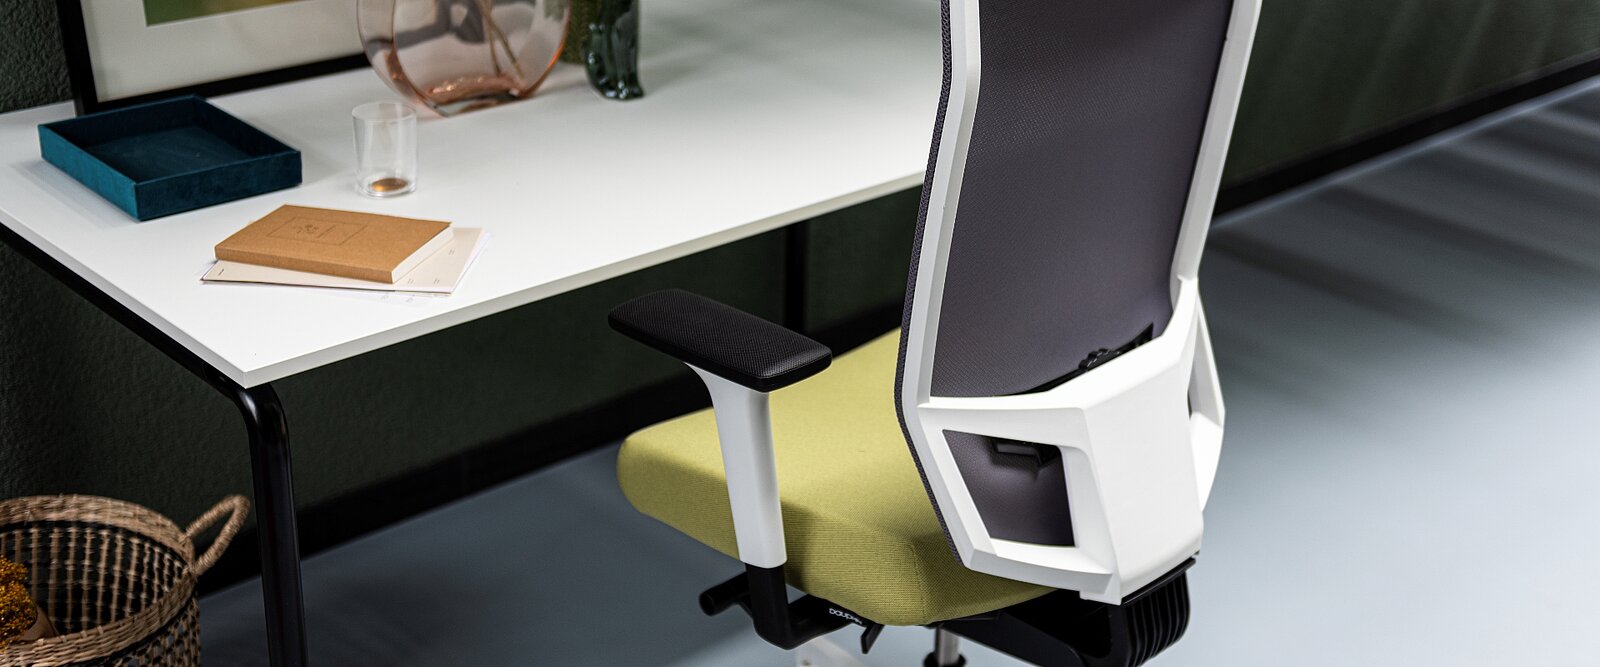 The striking mesh backrest from @Just evo also fits perfectly into any home office.